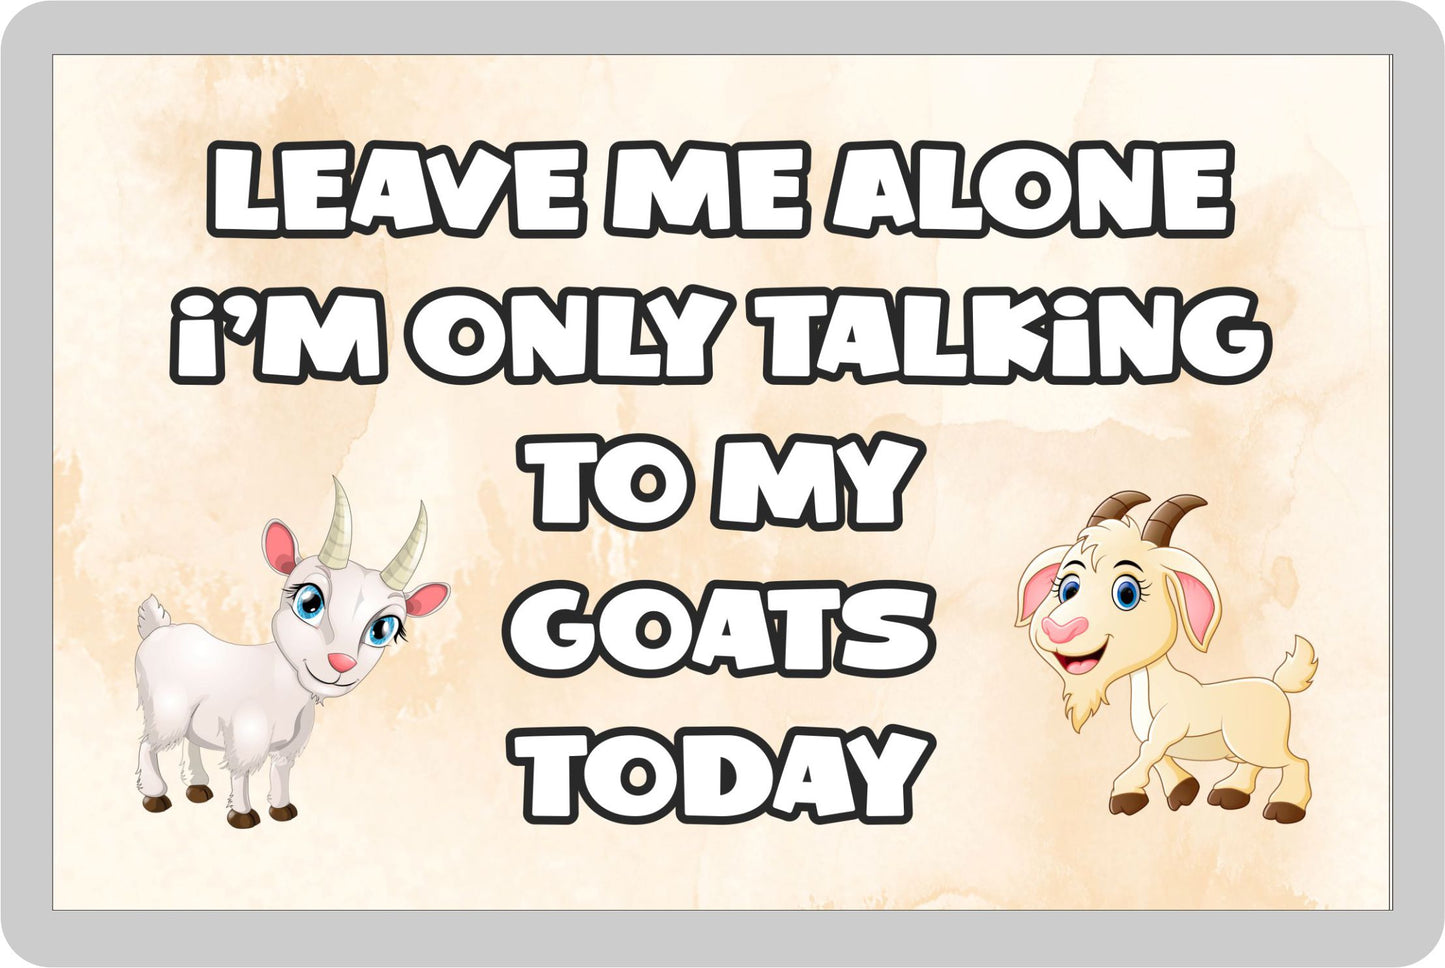 Goat Fridge Magnet Gift - Leave Me Alone I'm Only Talking To My * Today - Novelty Cute Bird Animal Present